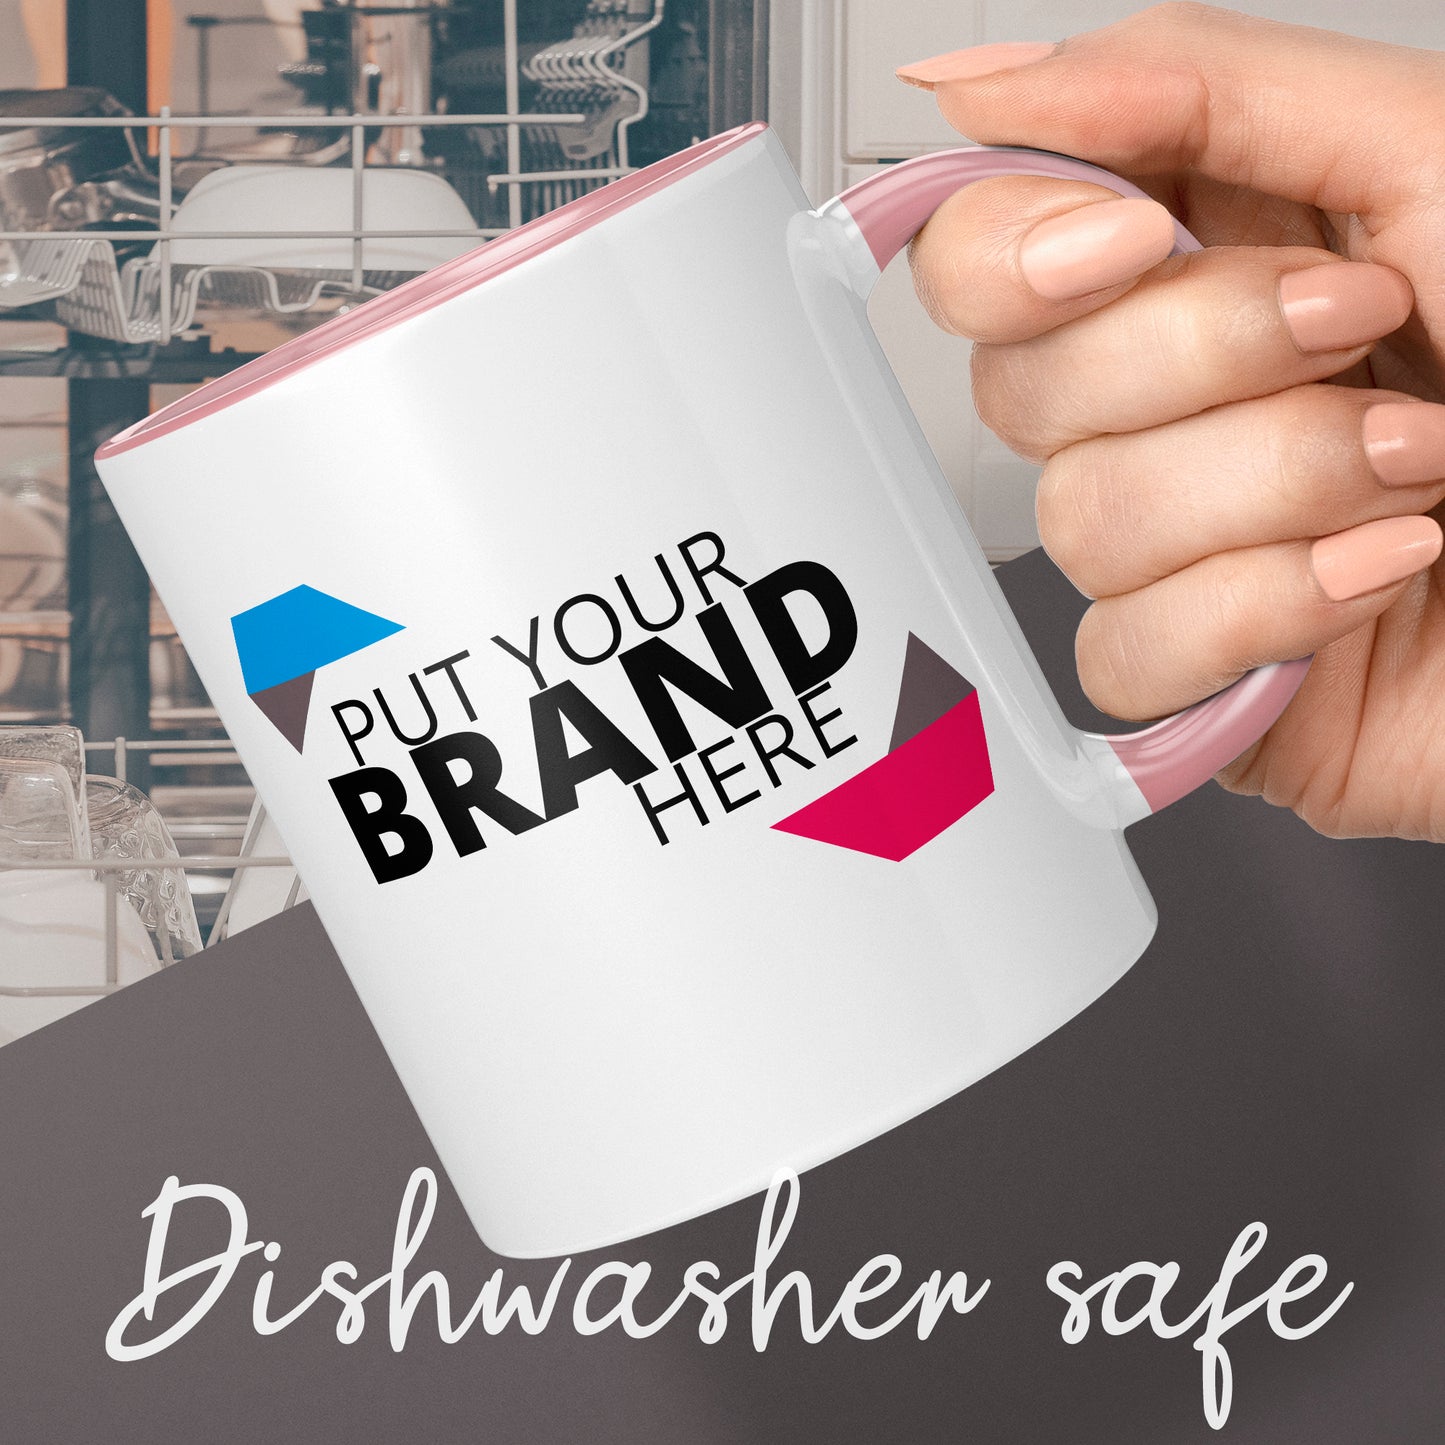 Branded Mugs (PINK) - Fully Inclusive Pricing Full Colour Both Sides &  Free Delivery